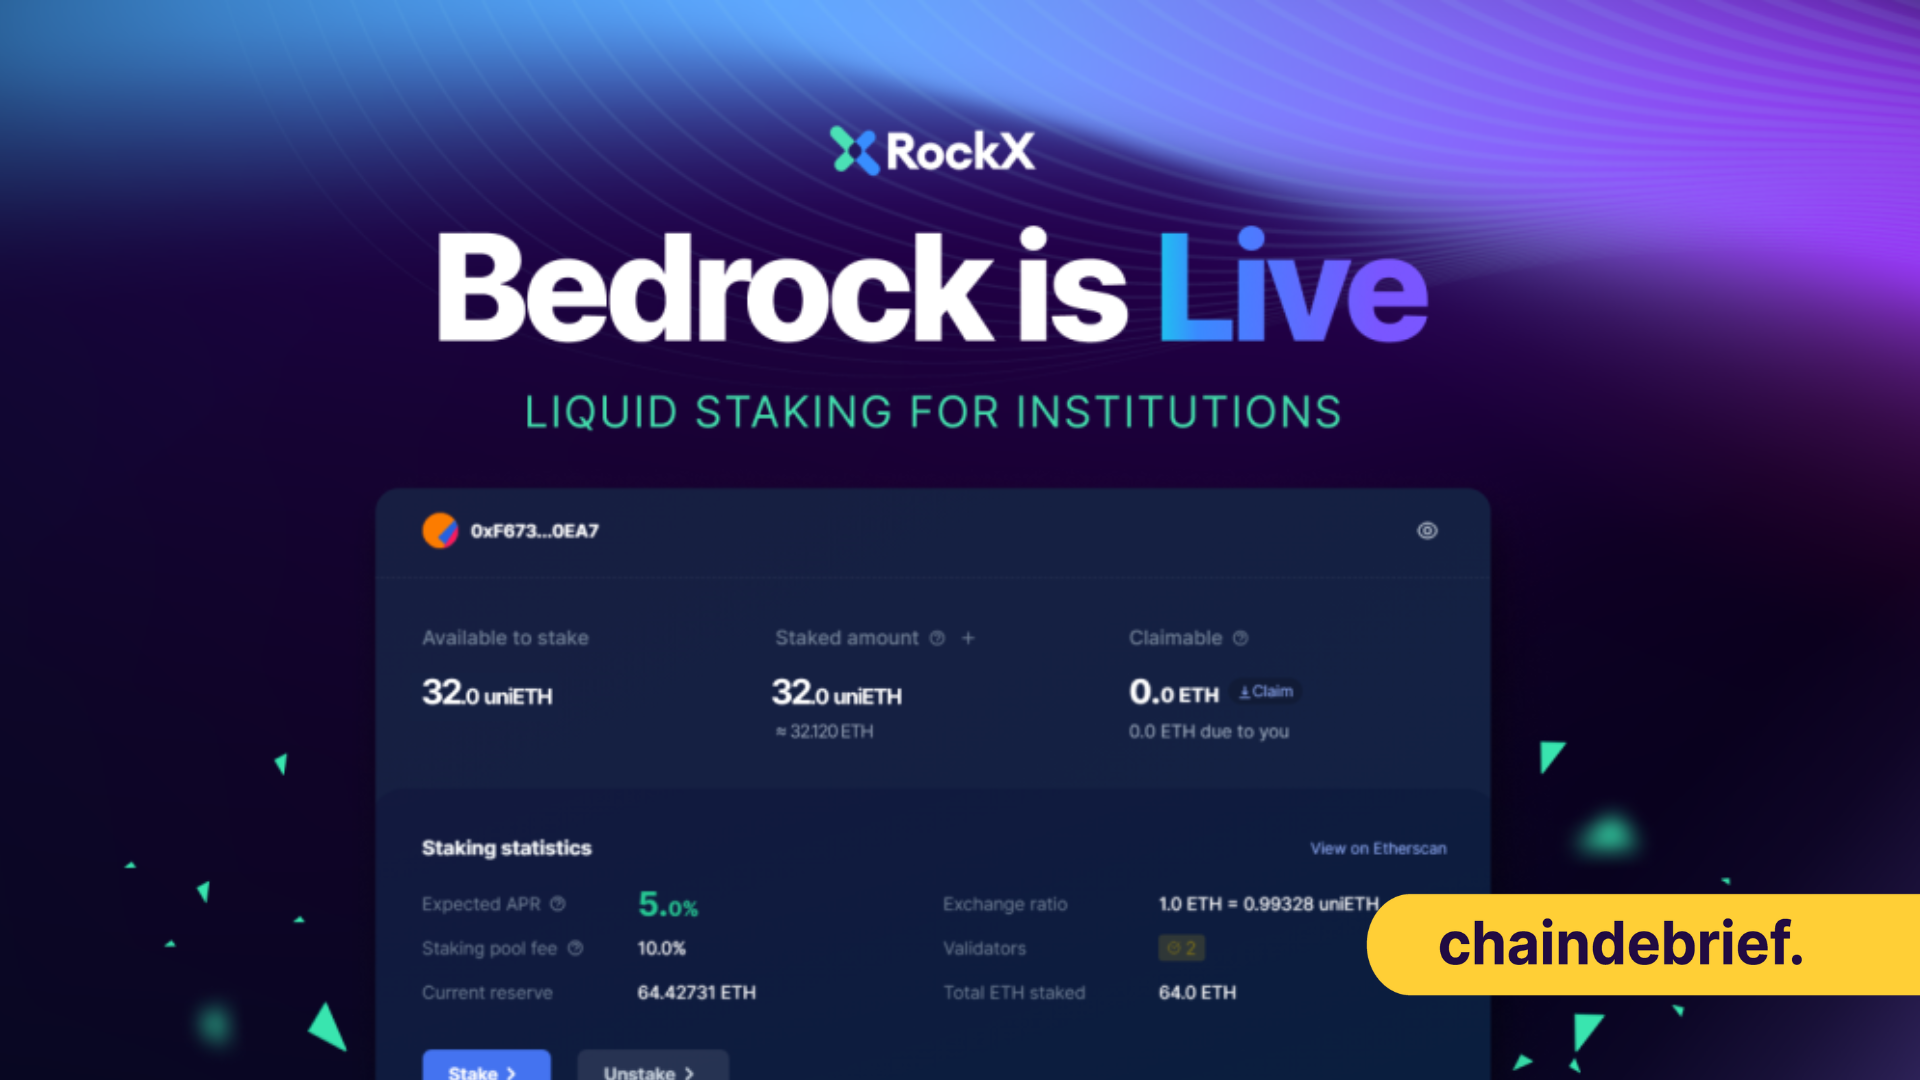 RockX Launches Bedrock To Make Liquid Staking Insanely Accessible For Retailers And Institutions